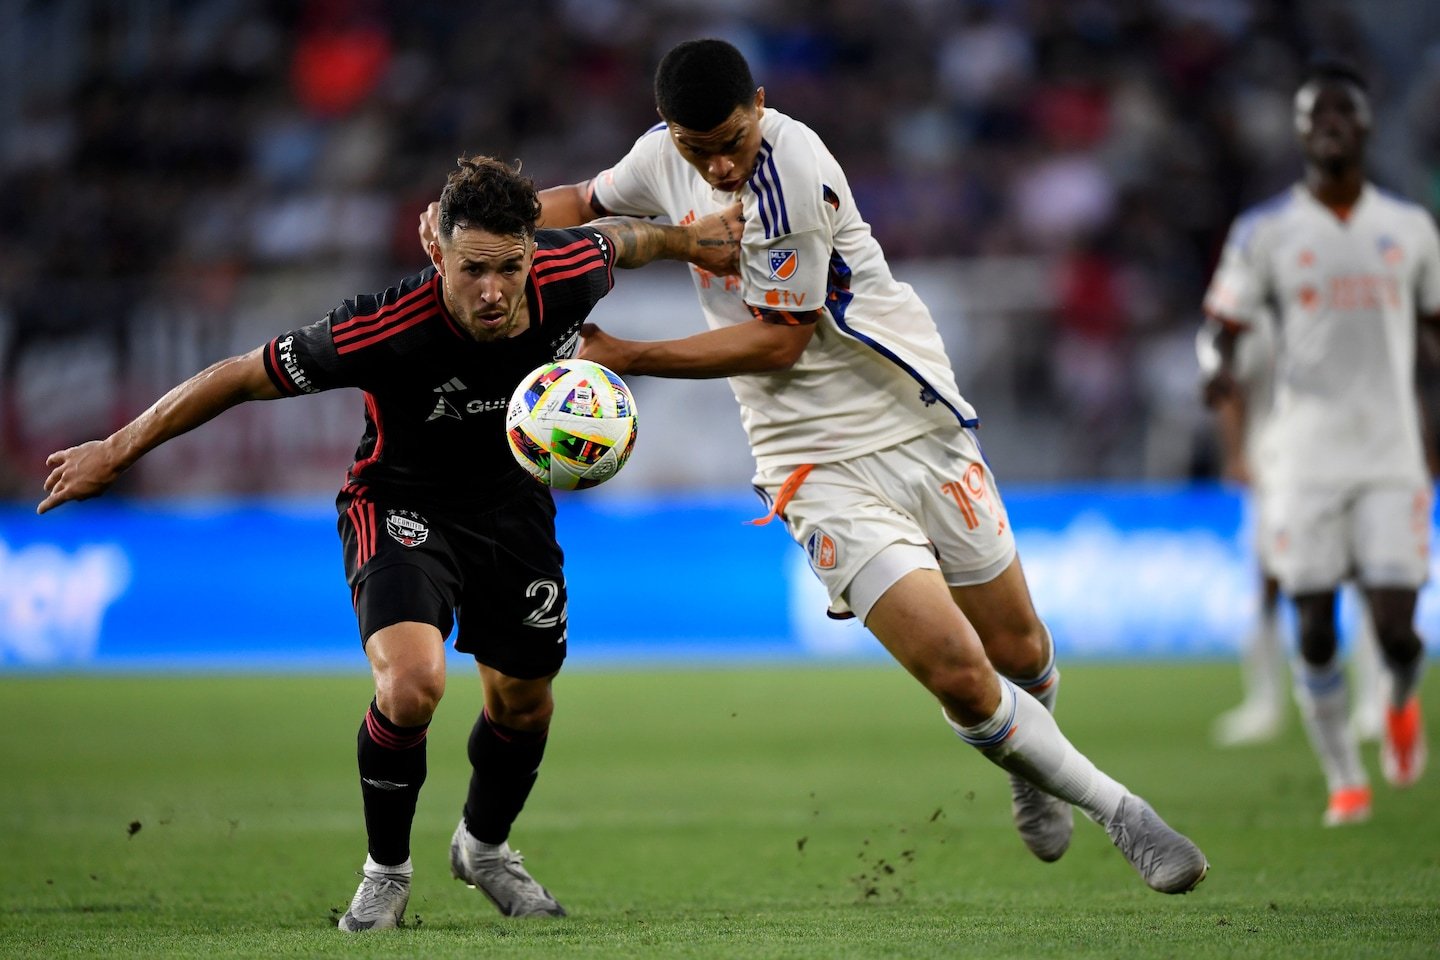 D.C. United, shorthanded on field and on bench, falls again at home